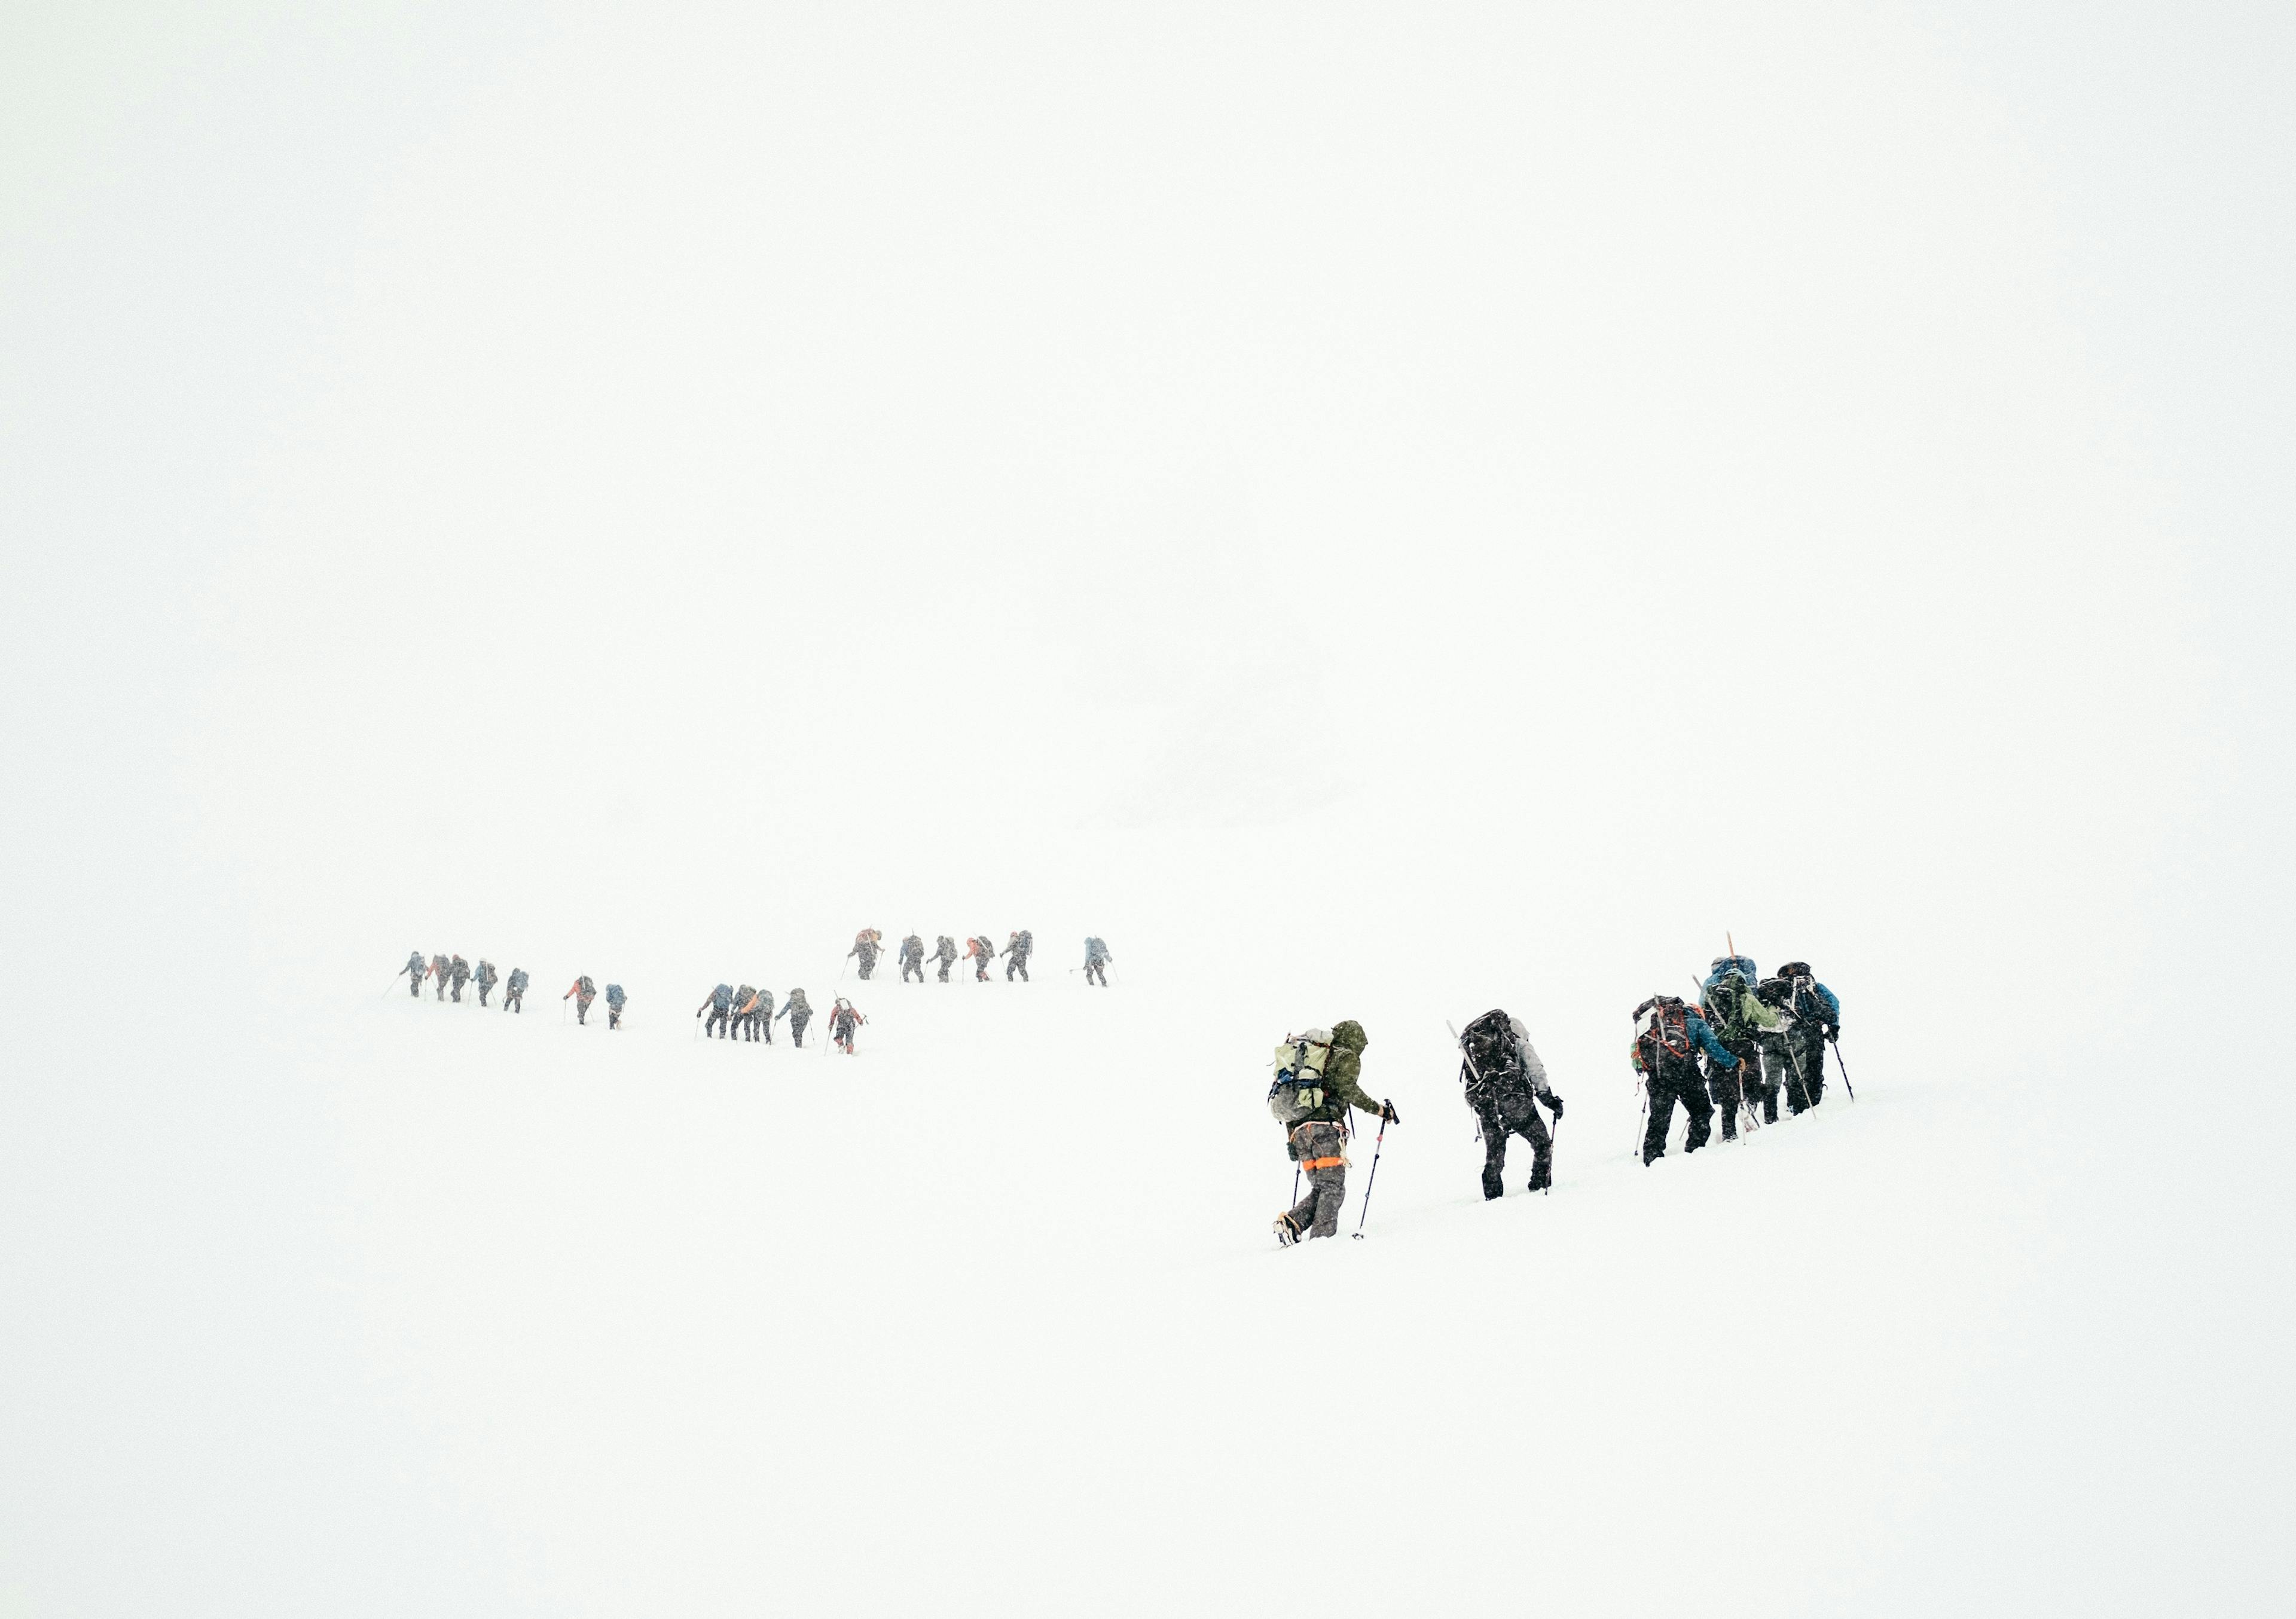 A flock of students take their chances at survival as they walk to their 8:30s. Source: photographer, dead from frostbite.